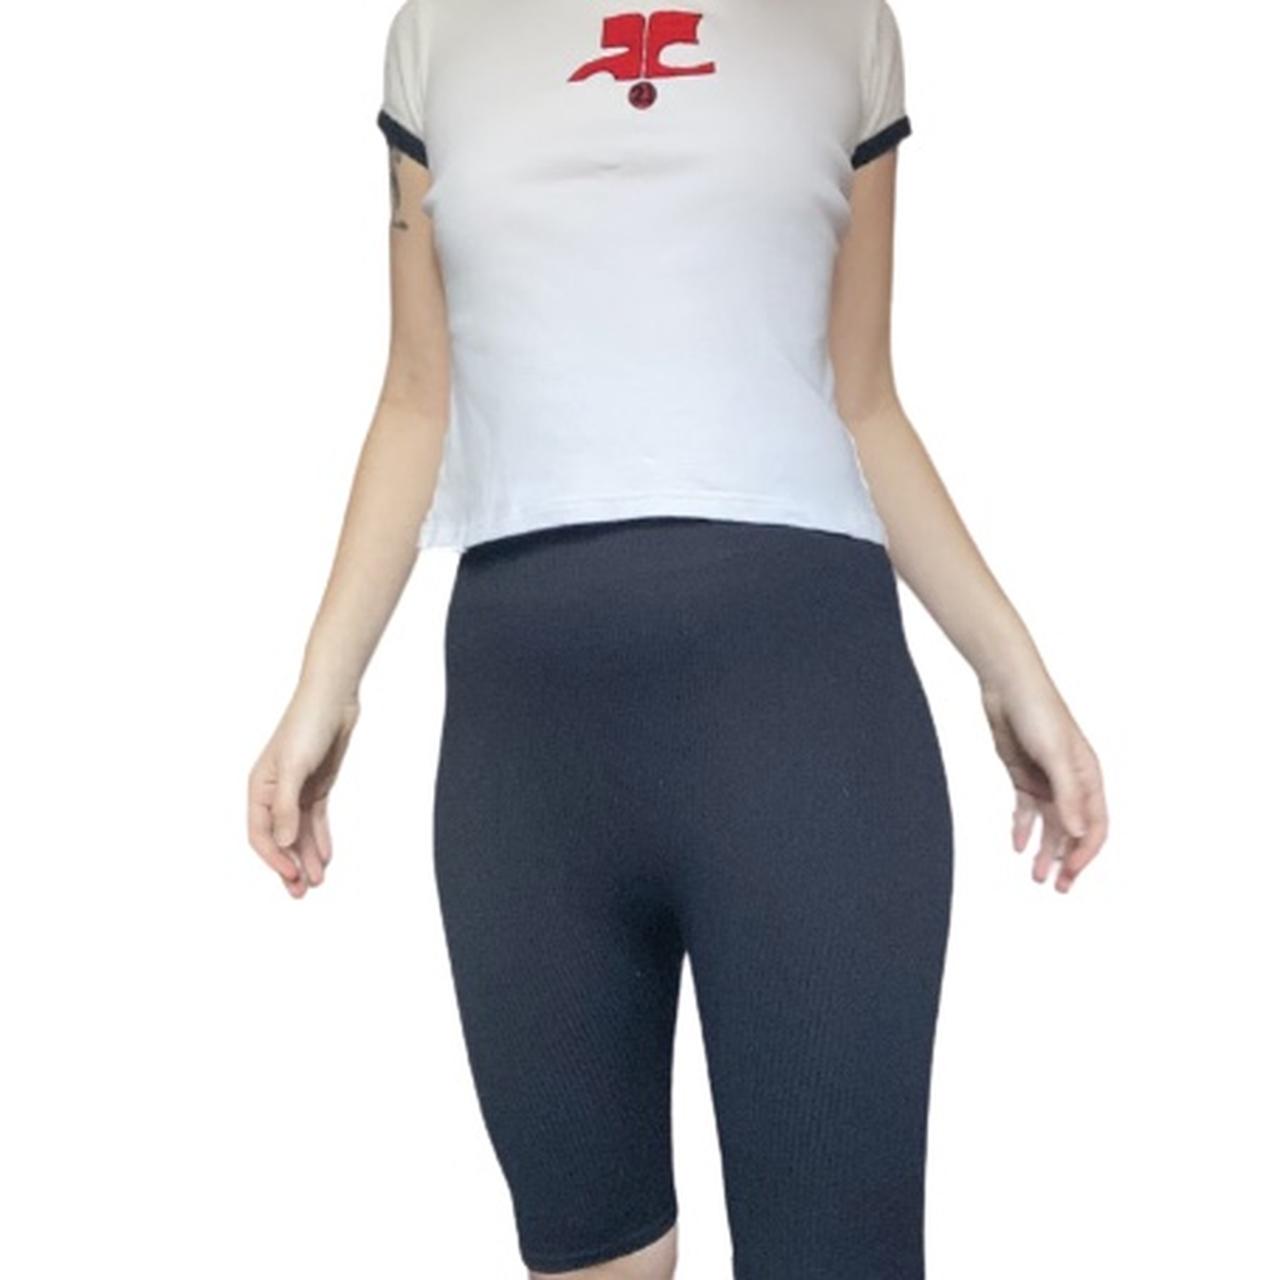 Women's Shorts and Tights